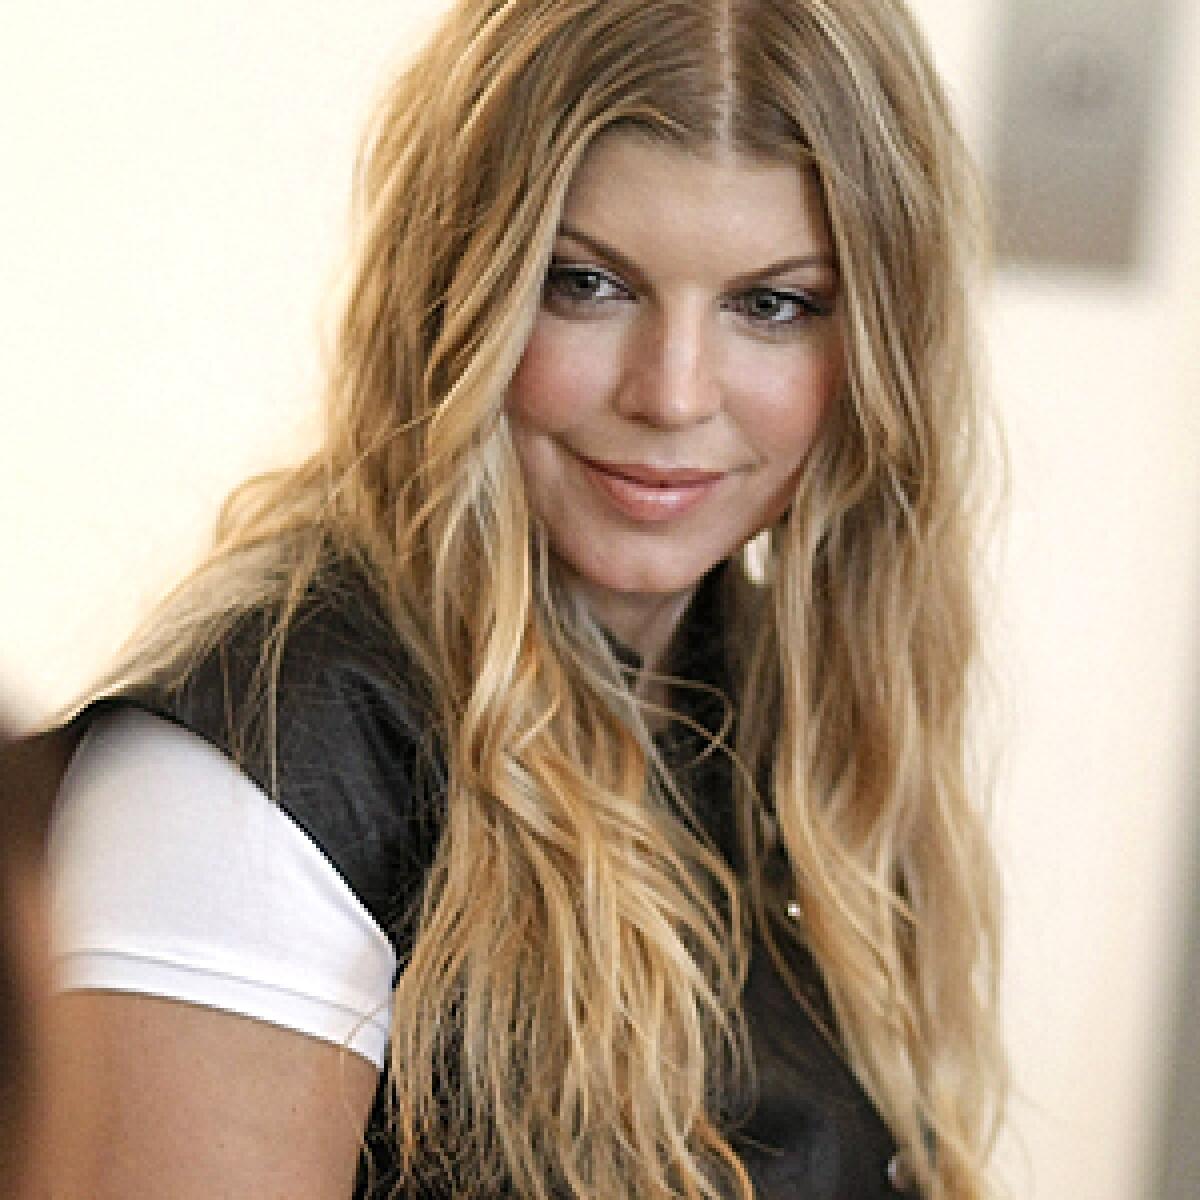 Fergie listens to stories from recipients of meals from the Project Angel Food program in Los Angeles.